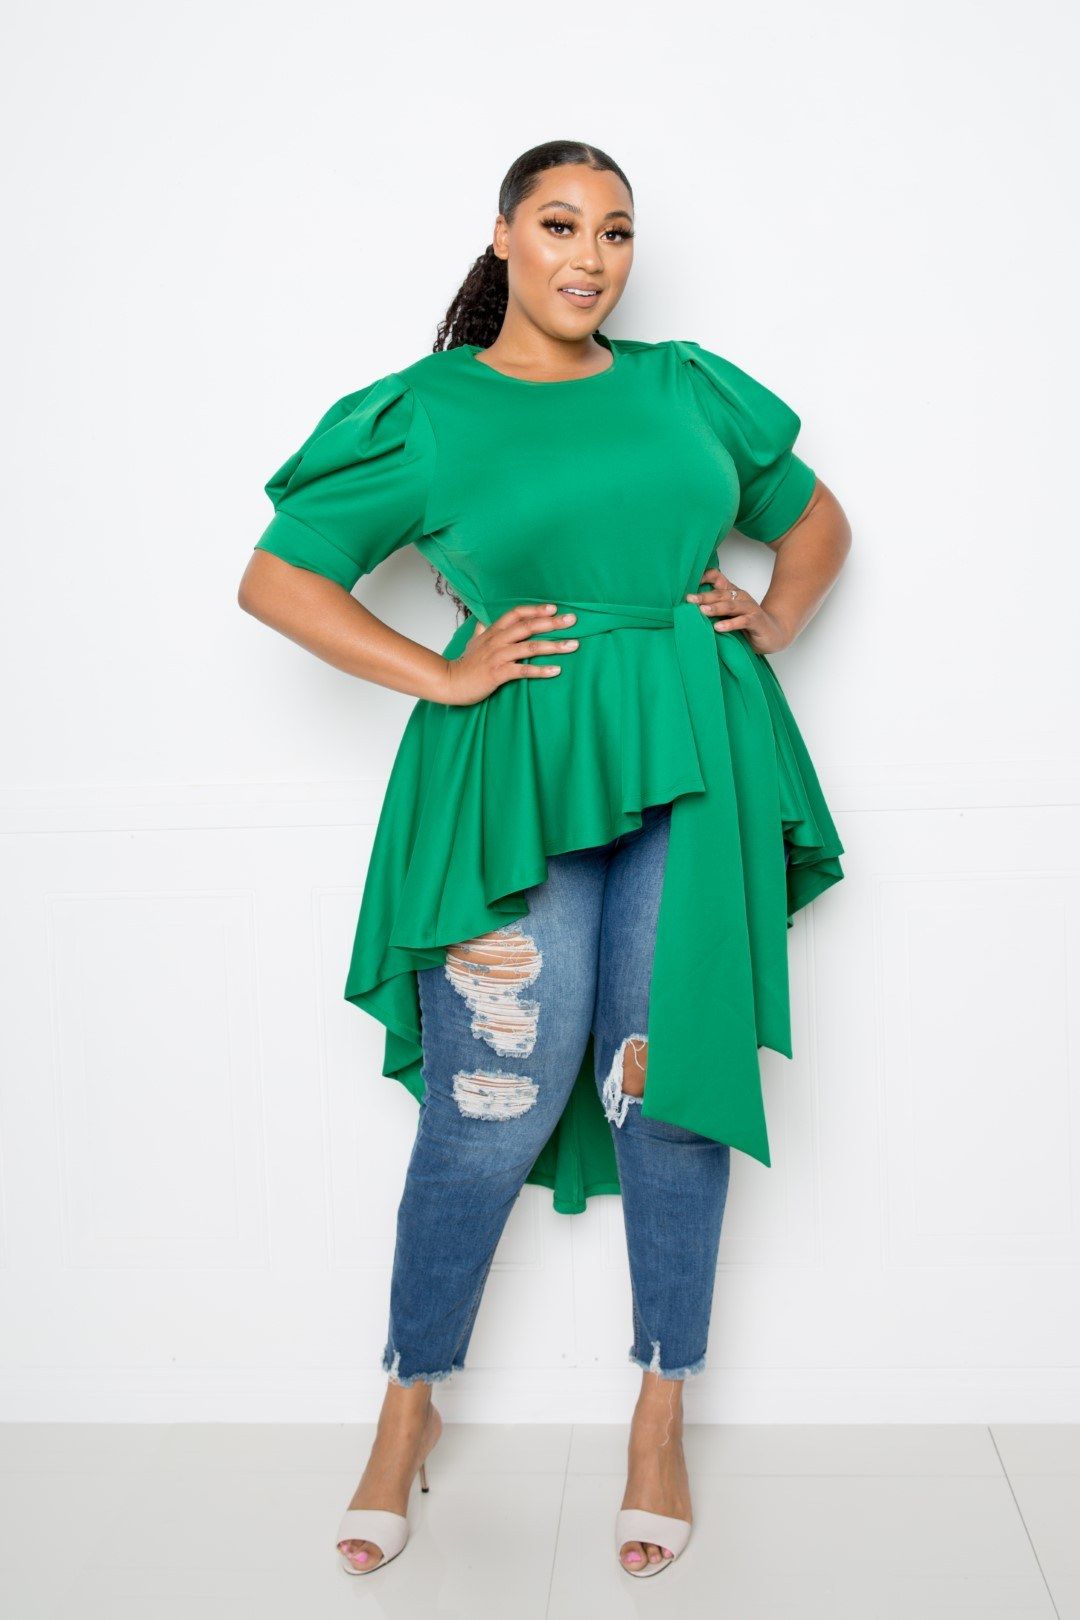 Plus size peplum top: style that works
for all shapes